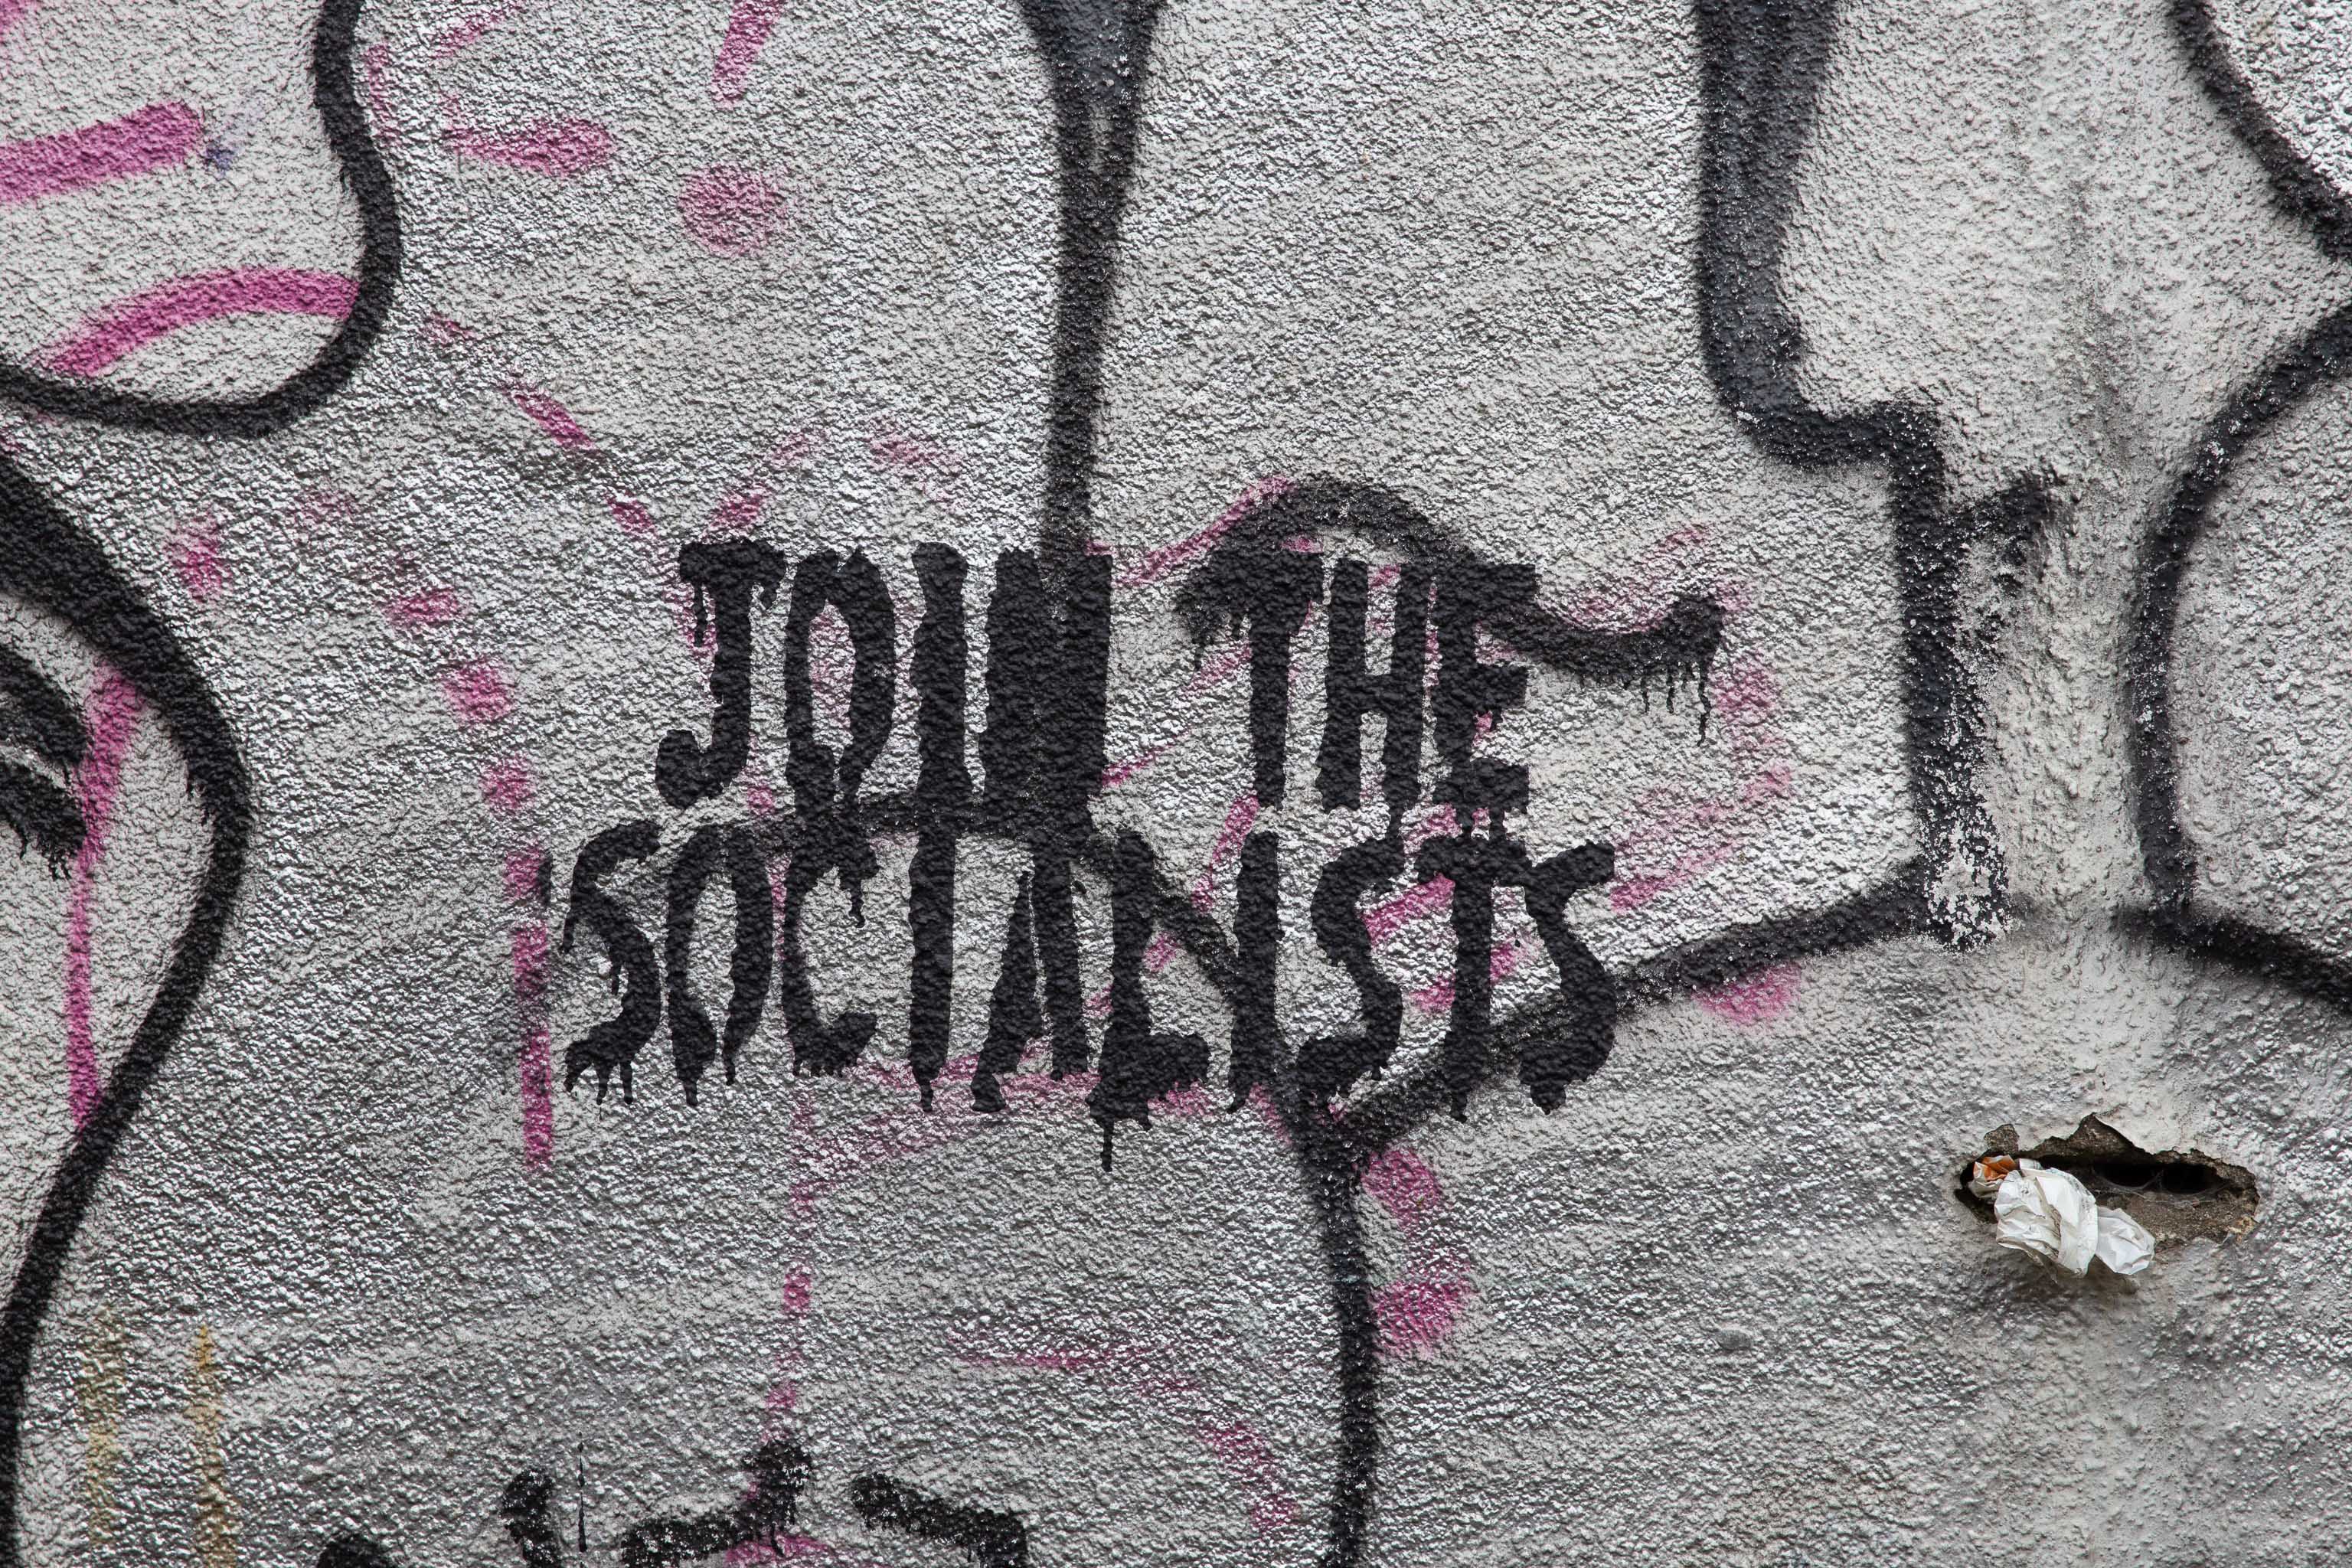 JOIN THE SOCIALISTS
I always base my political affiliations on things I've read scrawled on the side of buildings, so I immediately signed up.
